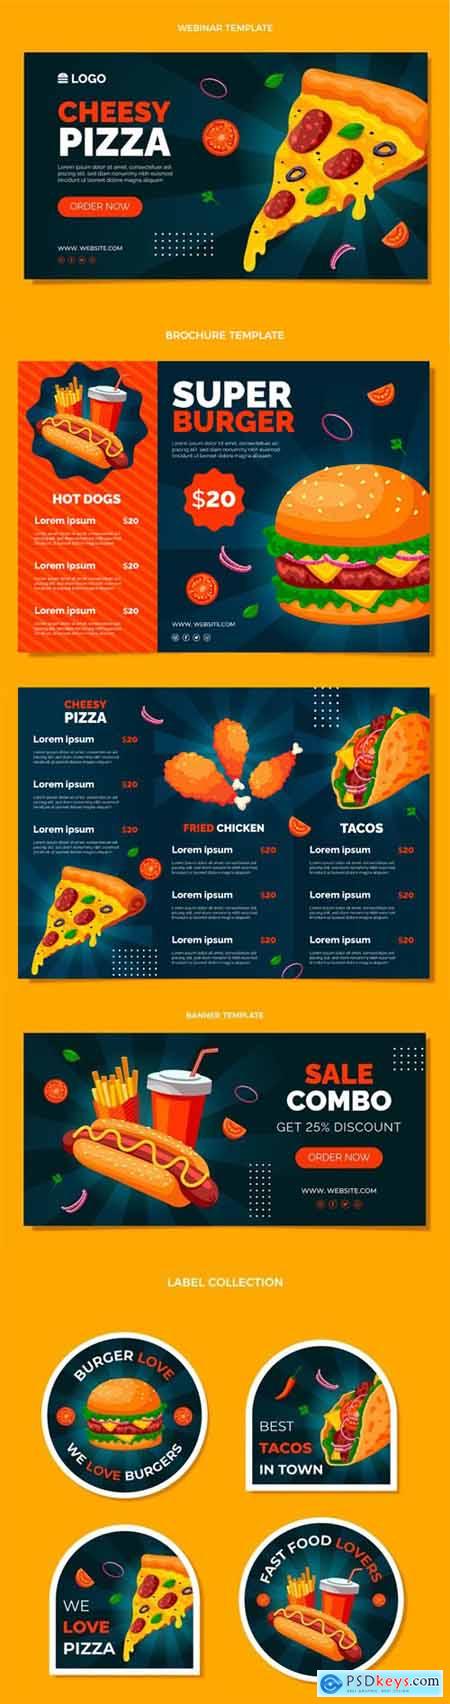 Fast Food & Pizza Vector Templates Collection